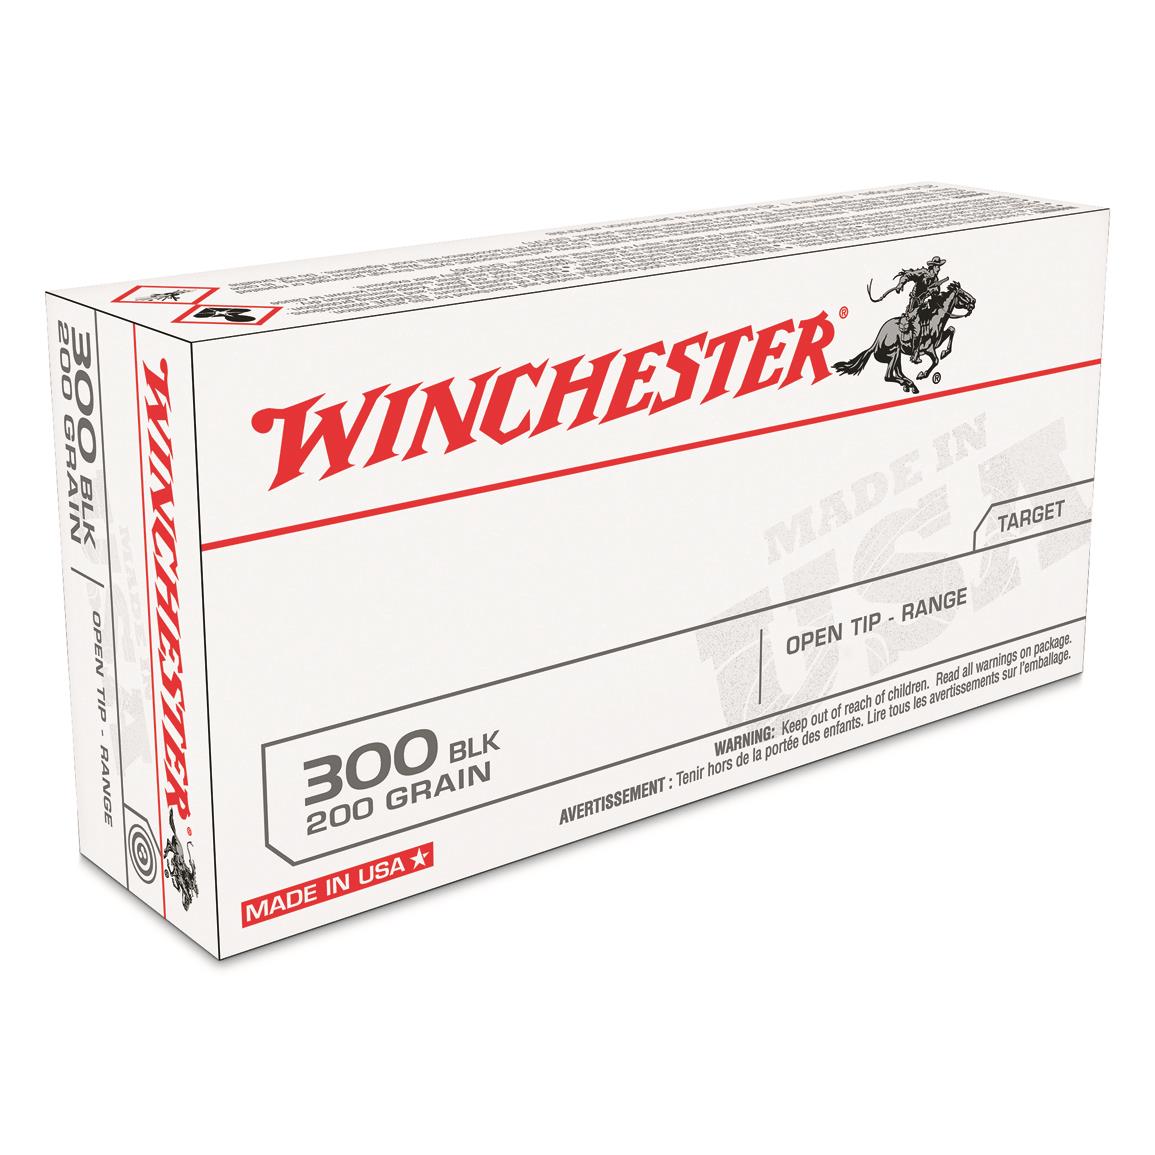 Winchesterm White Box .300 Blackout 200 Grain 20 Rounds - $14.99 (Free 2-Day Shipping over $50)